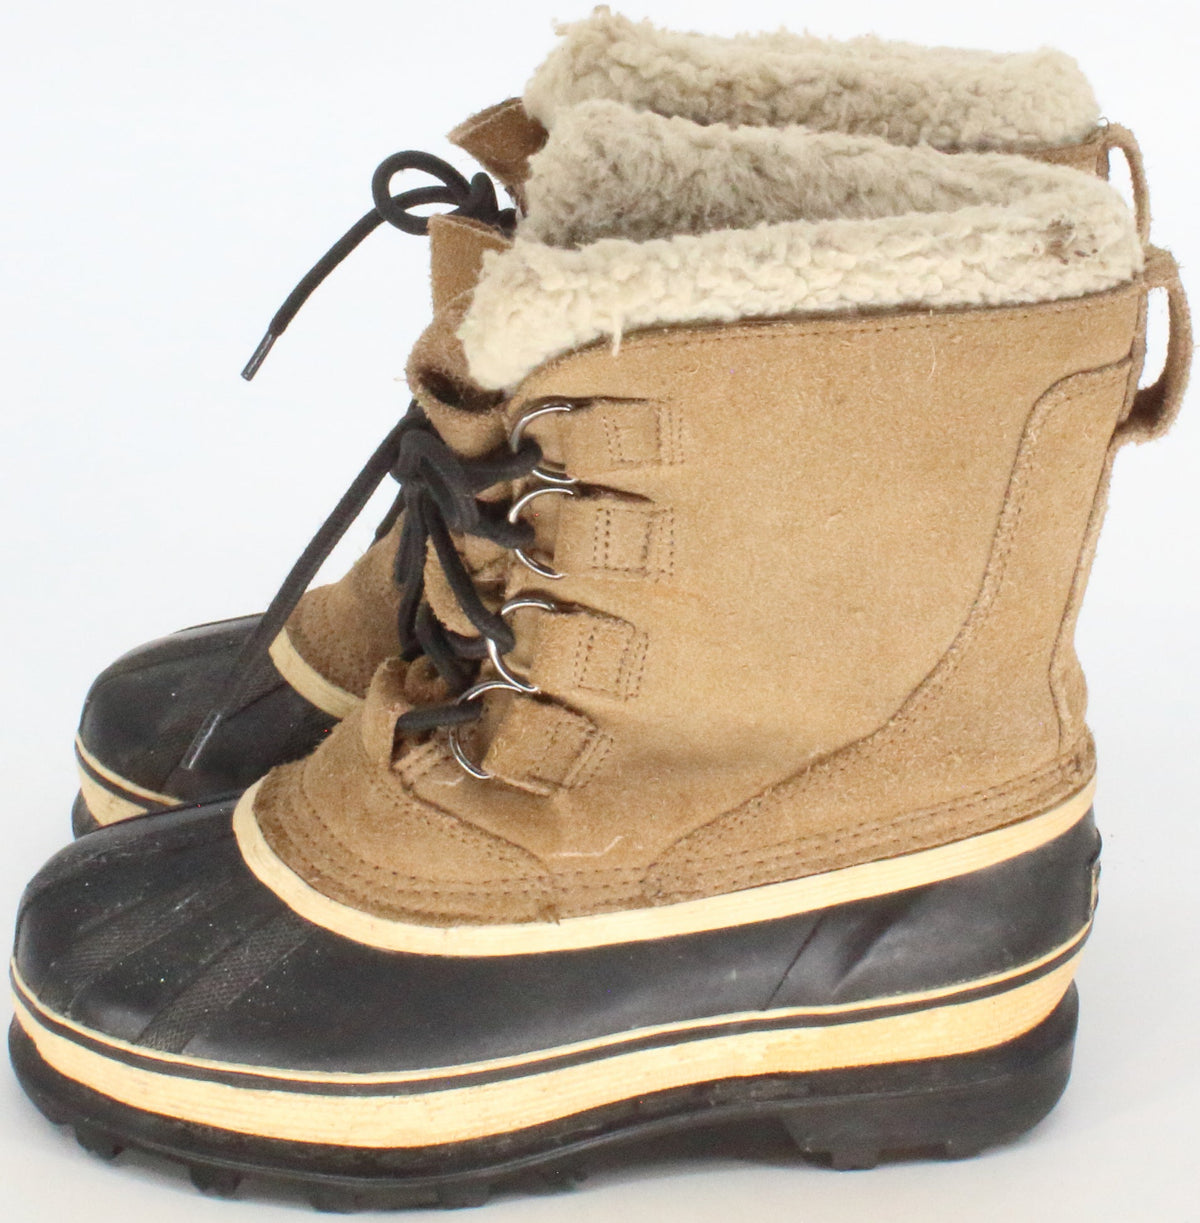 Ozark Trail Thinsulate Beige and Black Insulated Boots